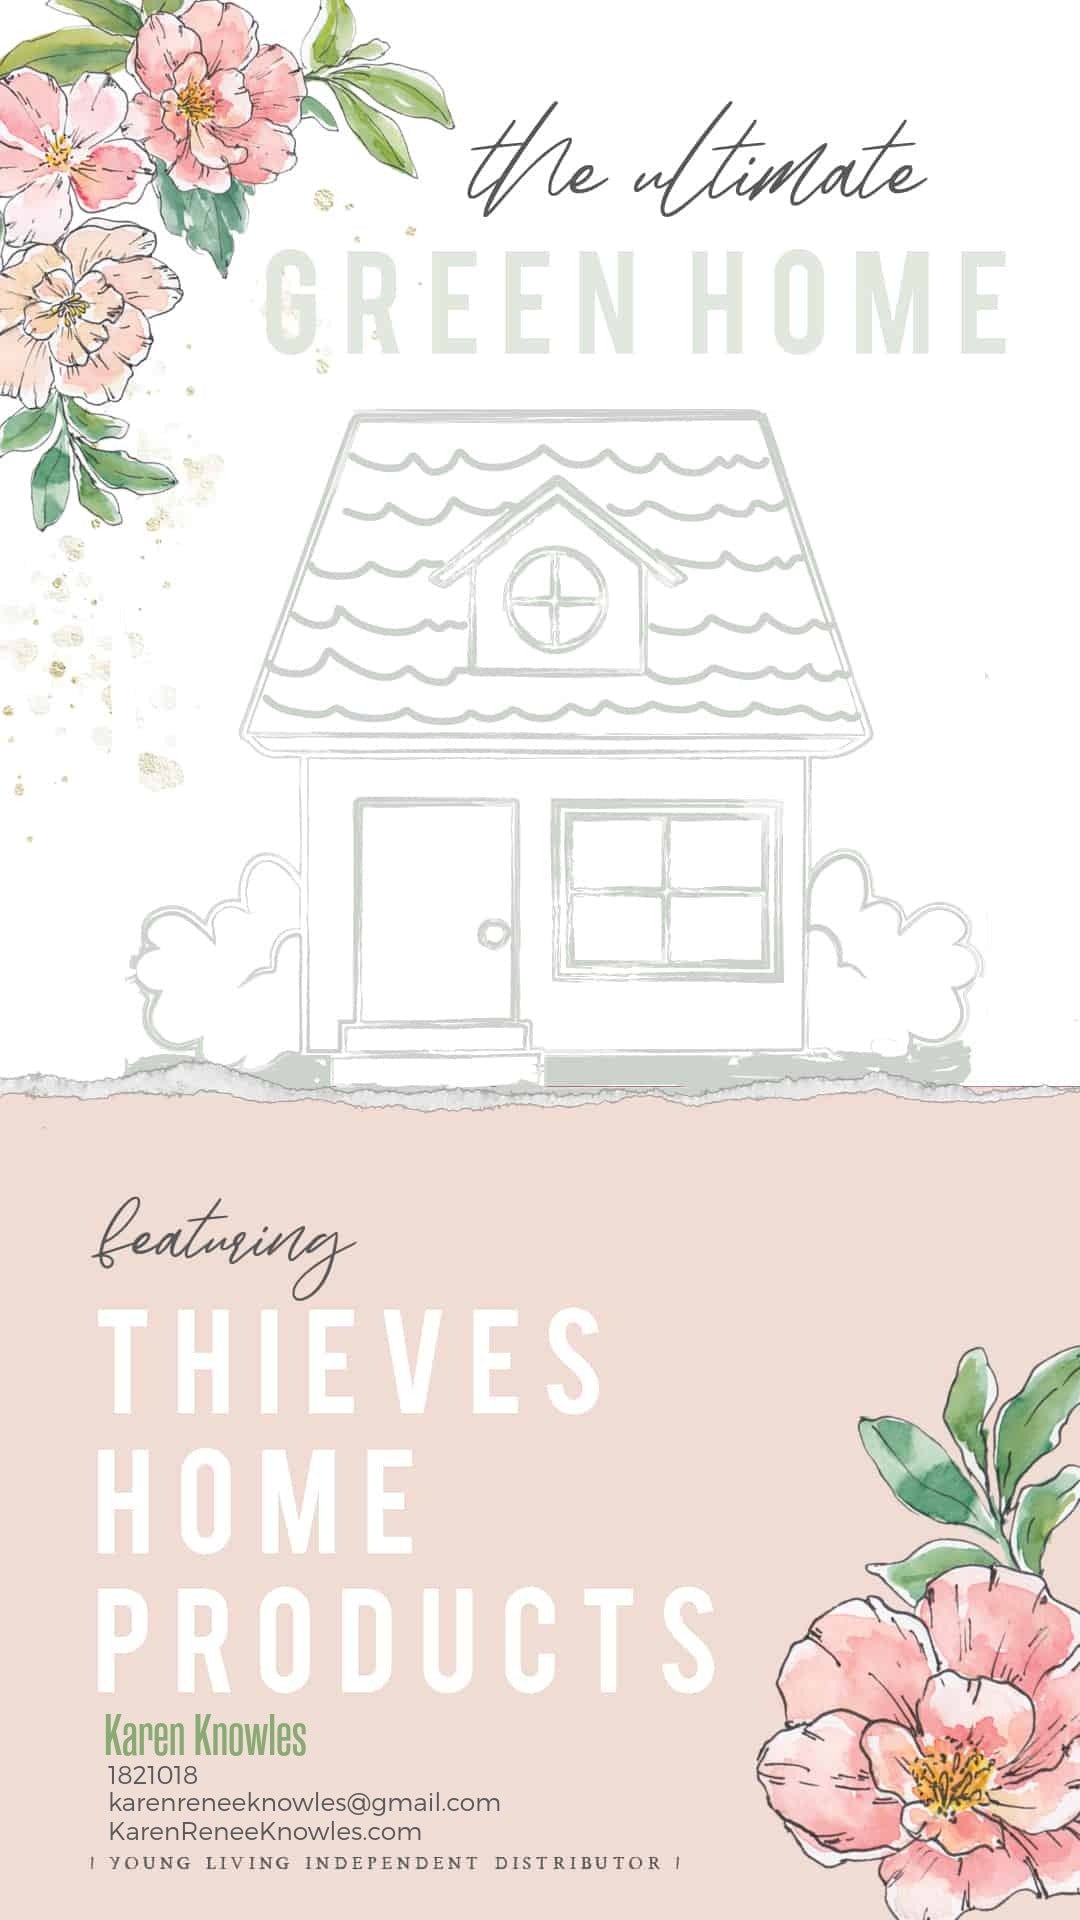 Green Home with Thieves